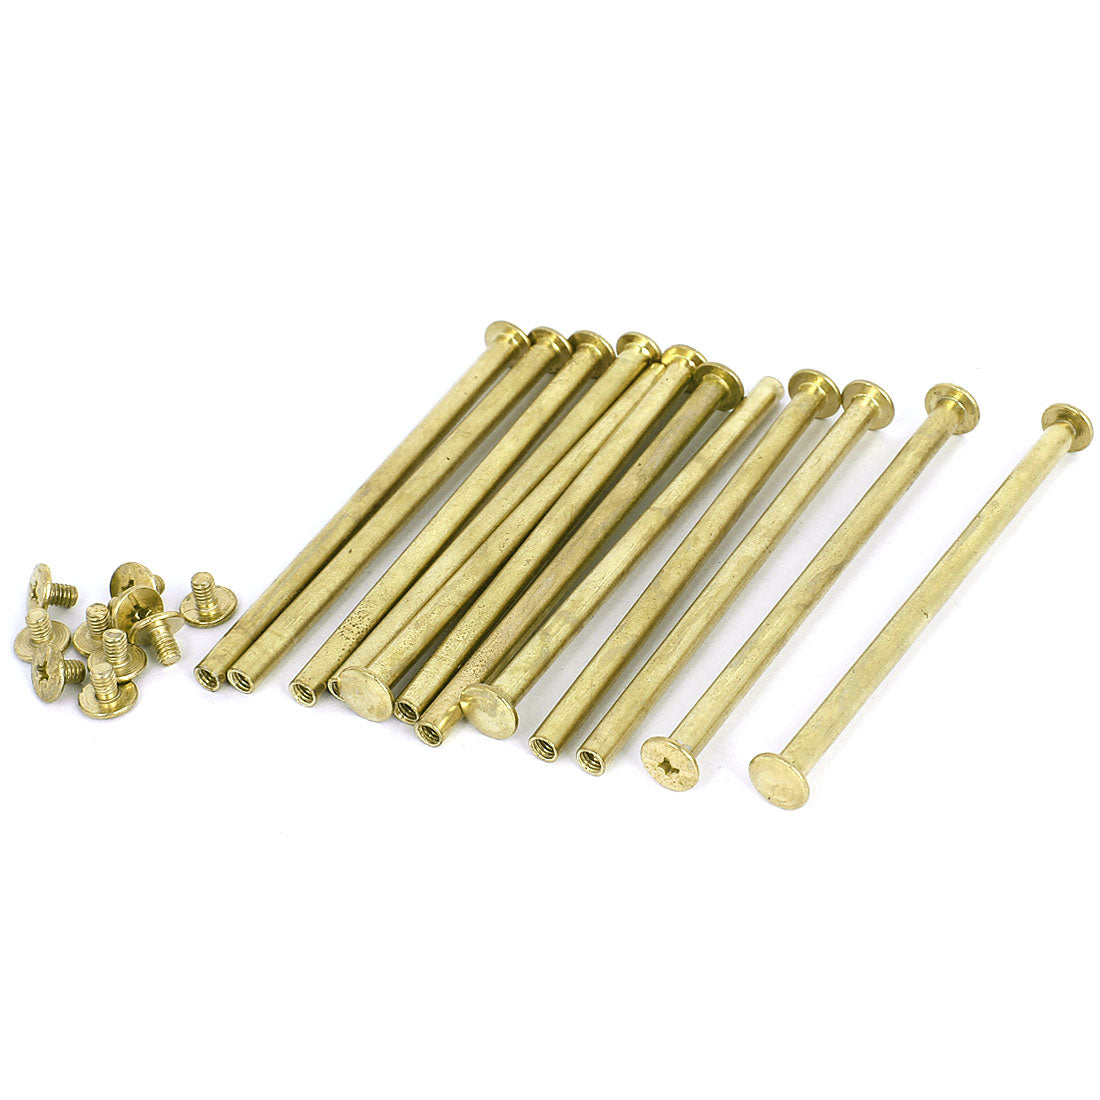 uxcell Uxcell Brass Plated 5x90mm Binding Chicago Screw Post 12pcs for Leather Scrapbook